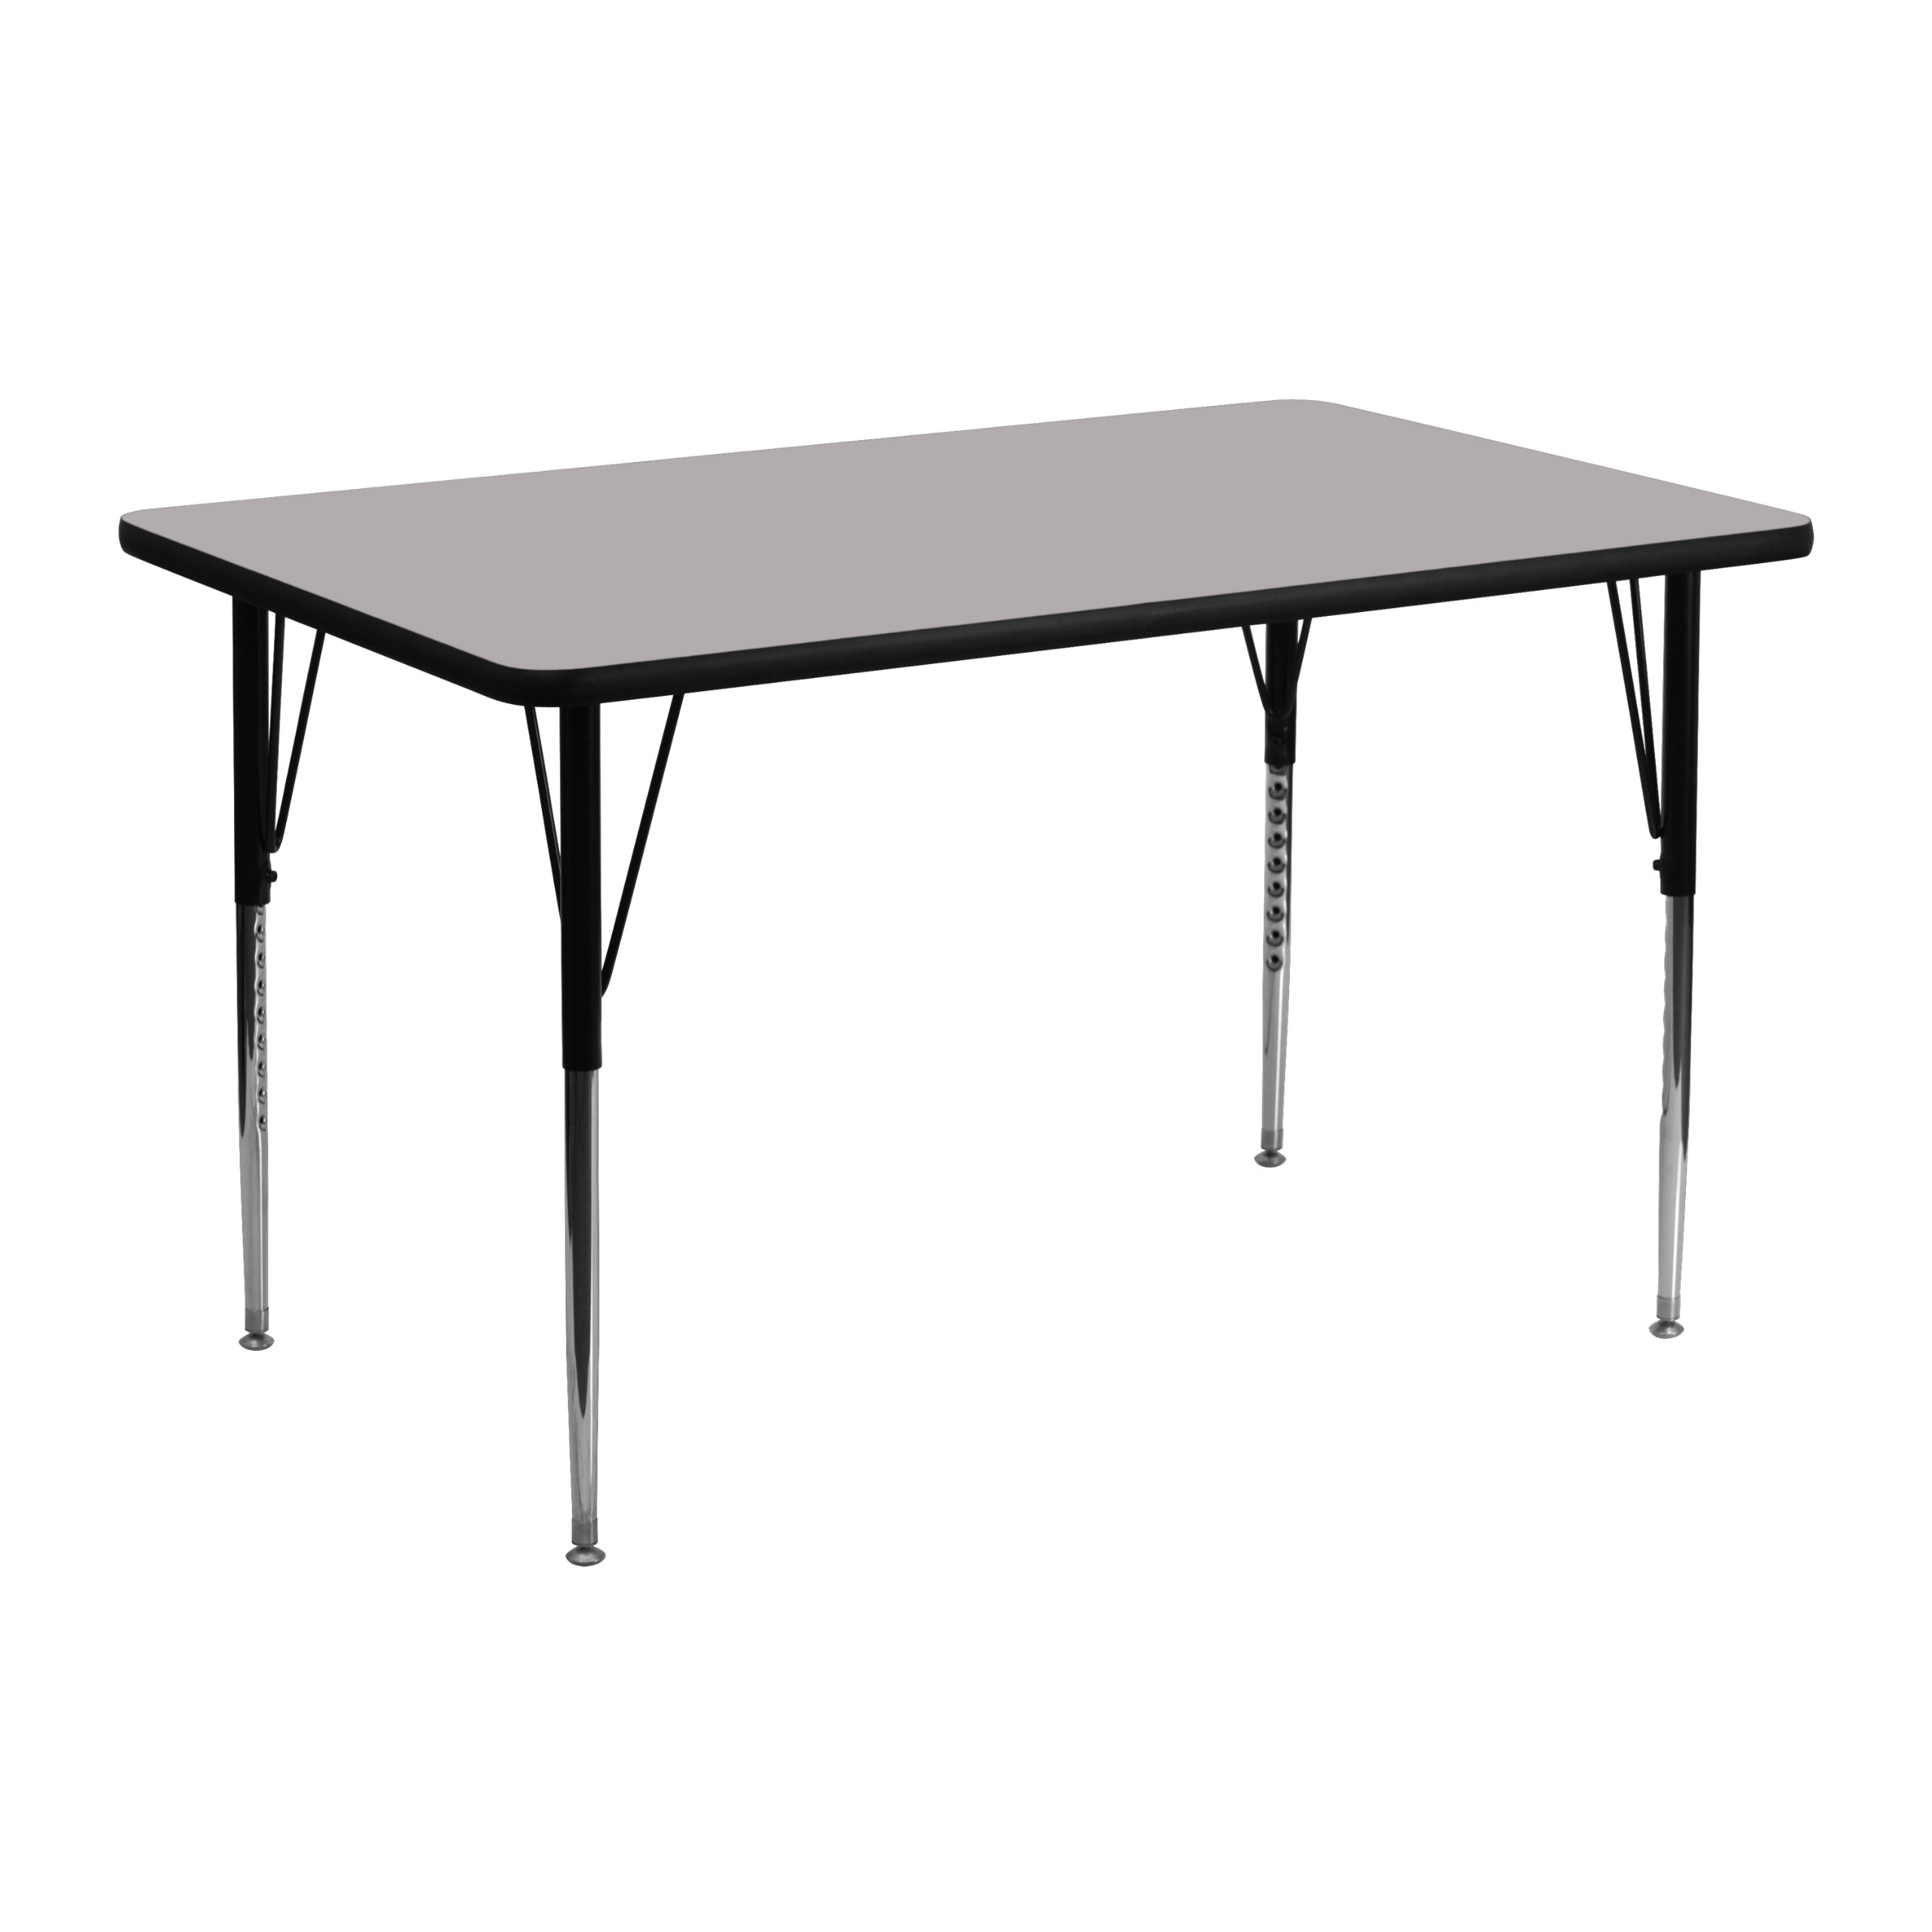 Flash Furniture 24 Rectangular Activity Table with Grey Thermal Fused Laminate Top/Standard Height Adjustable Legs